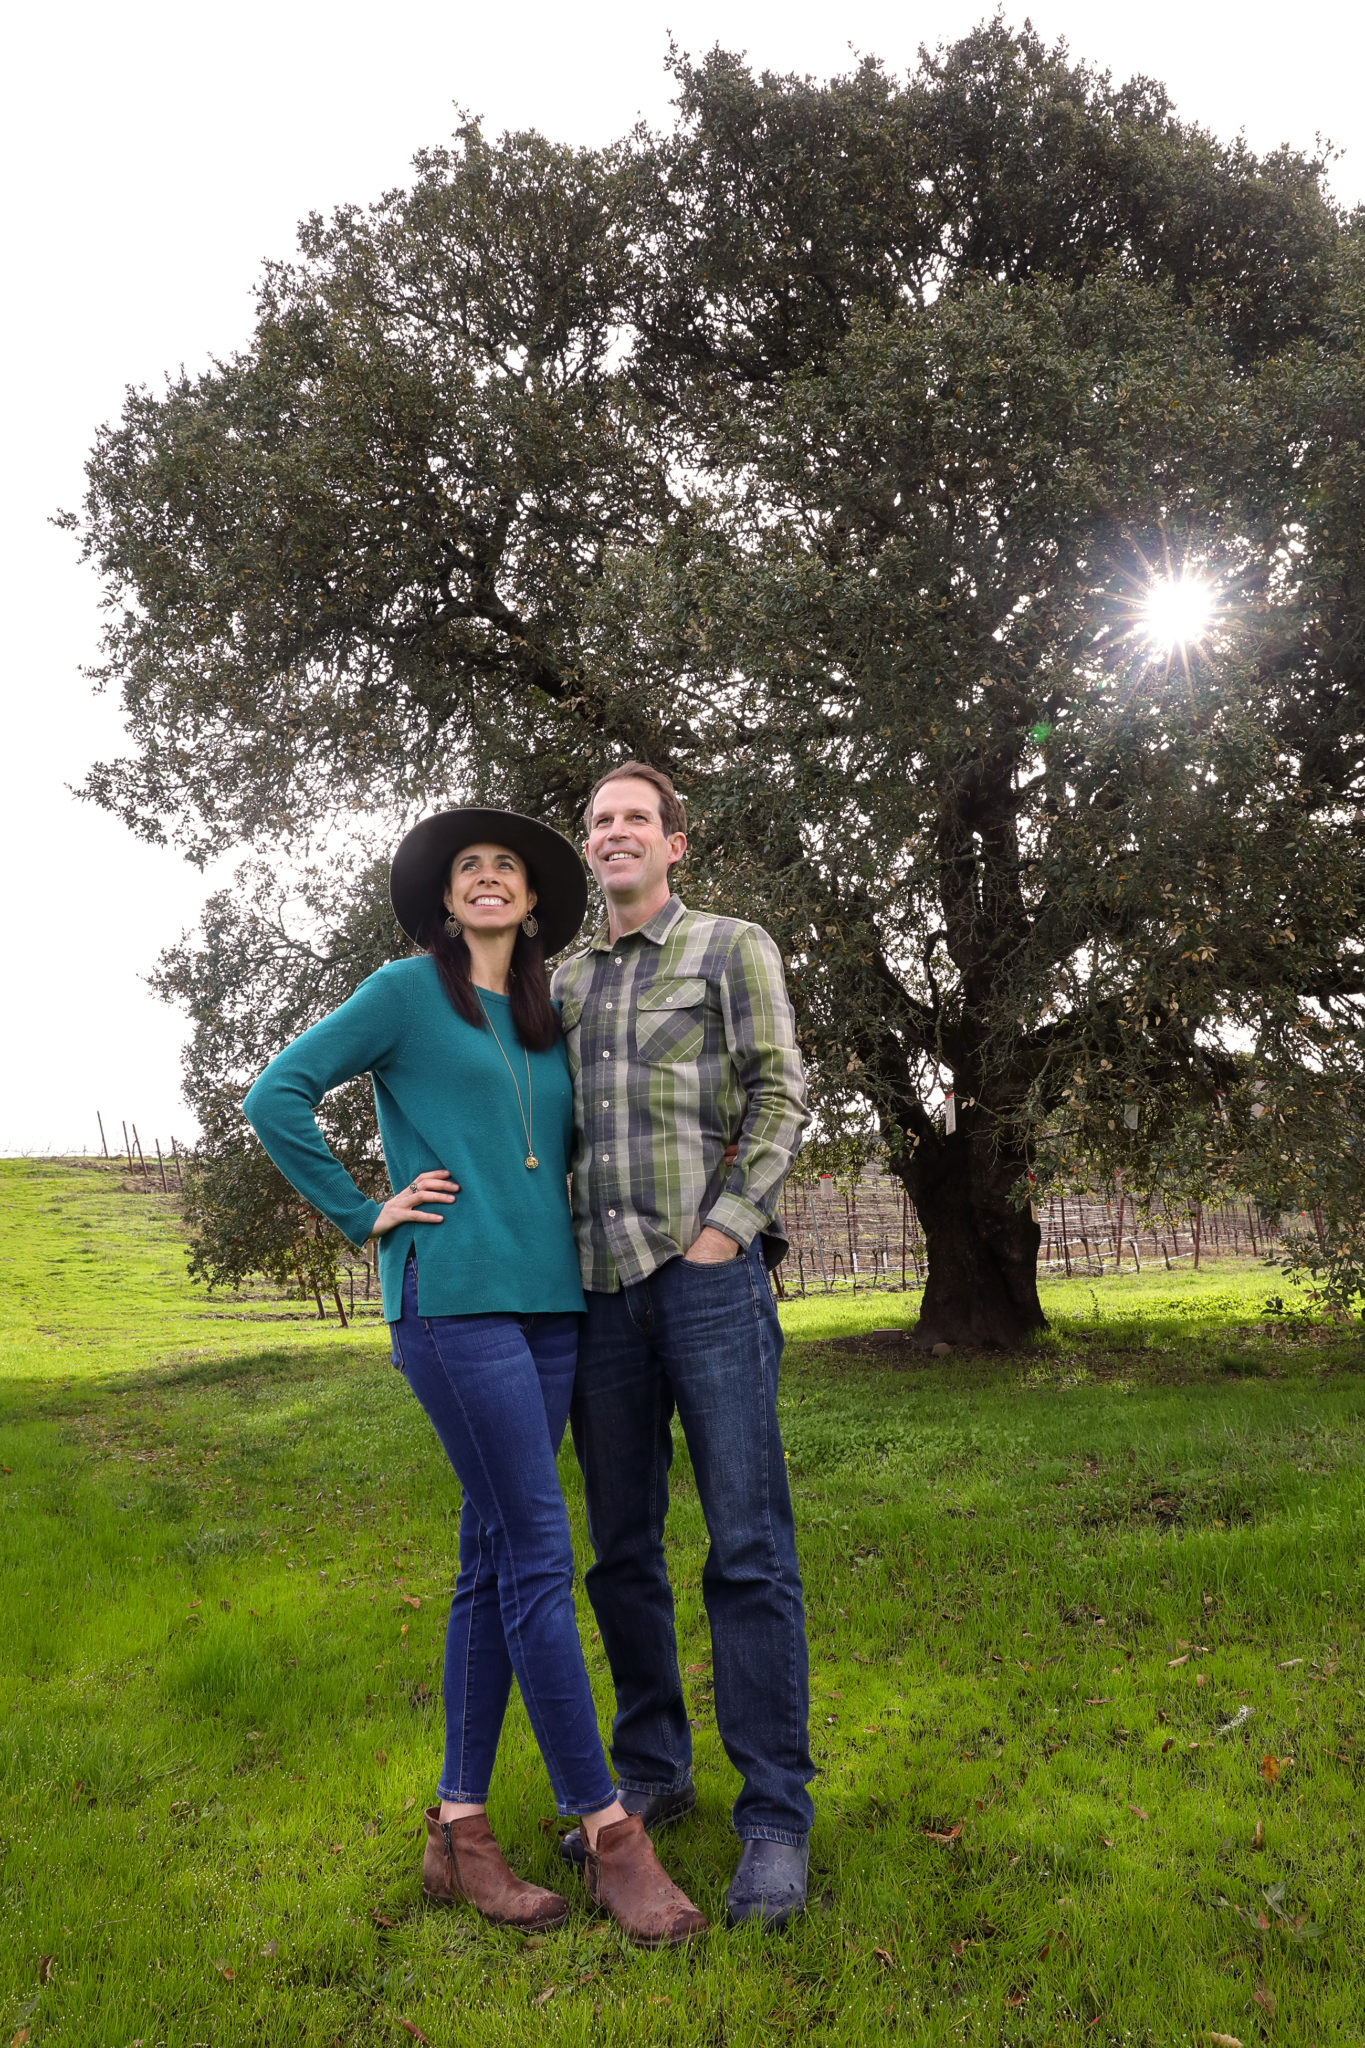 Nate and Lauren Belden at the Wishing Tree on their Belden Barns property, on the northwest shoulder of Sonoma Mountain, near Santa Rosa on Thursday, January 30, 2020. (Christopher Chung/ The Press Democrat)